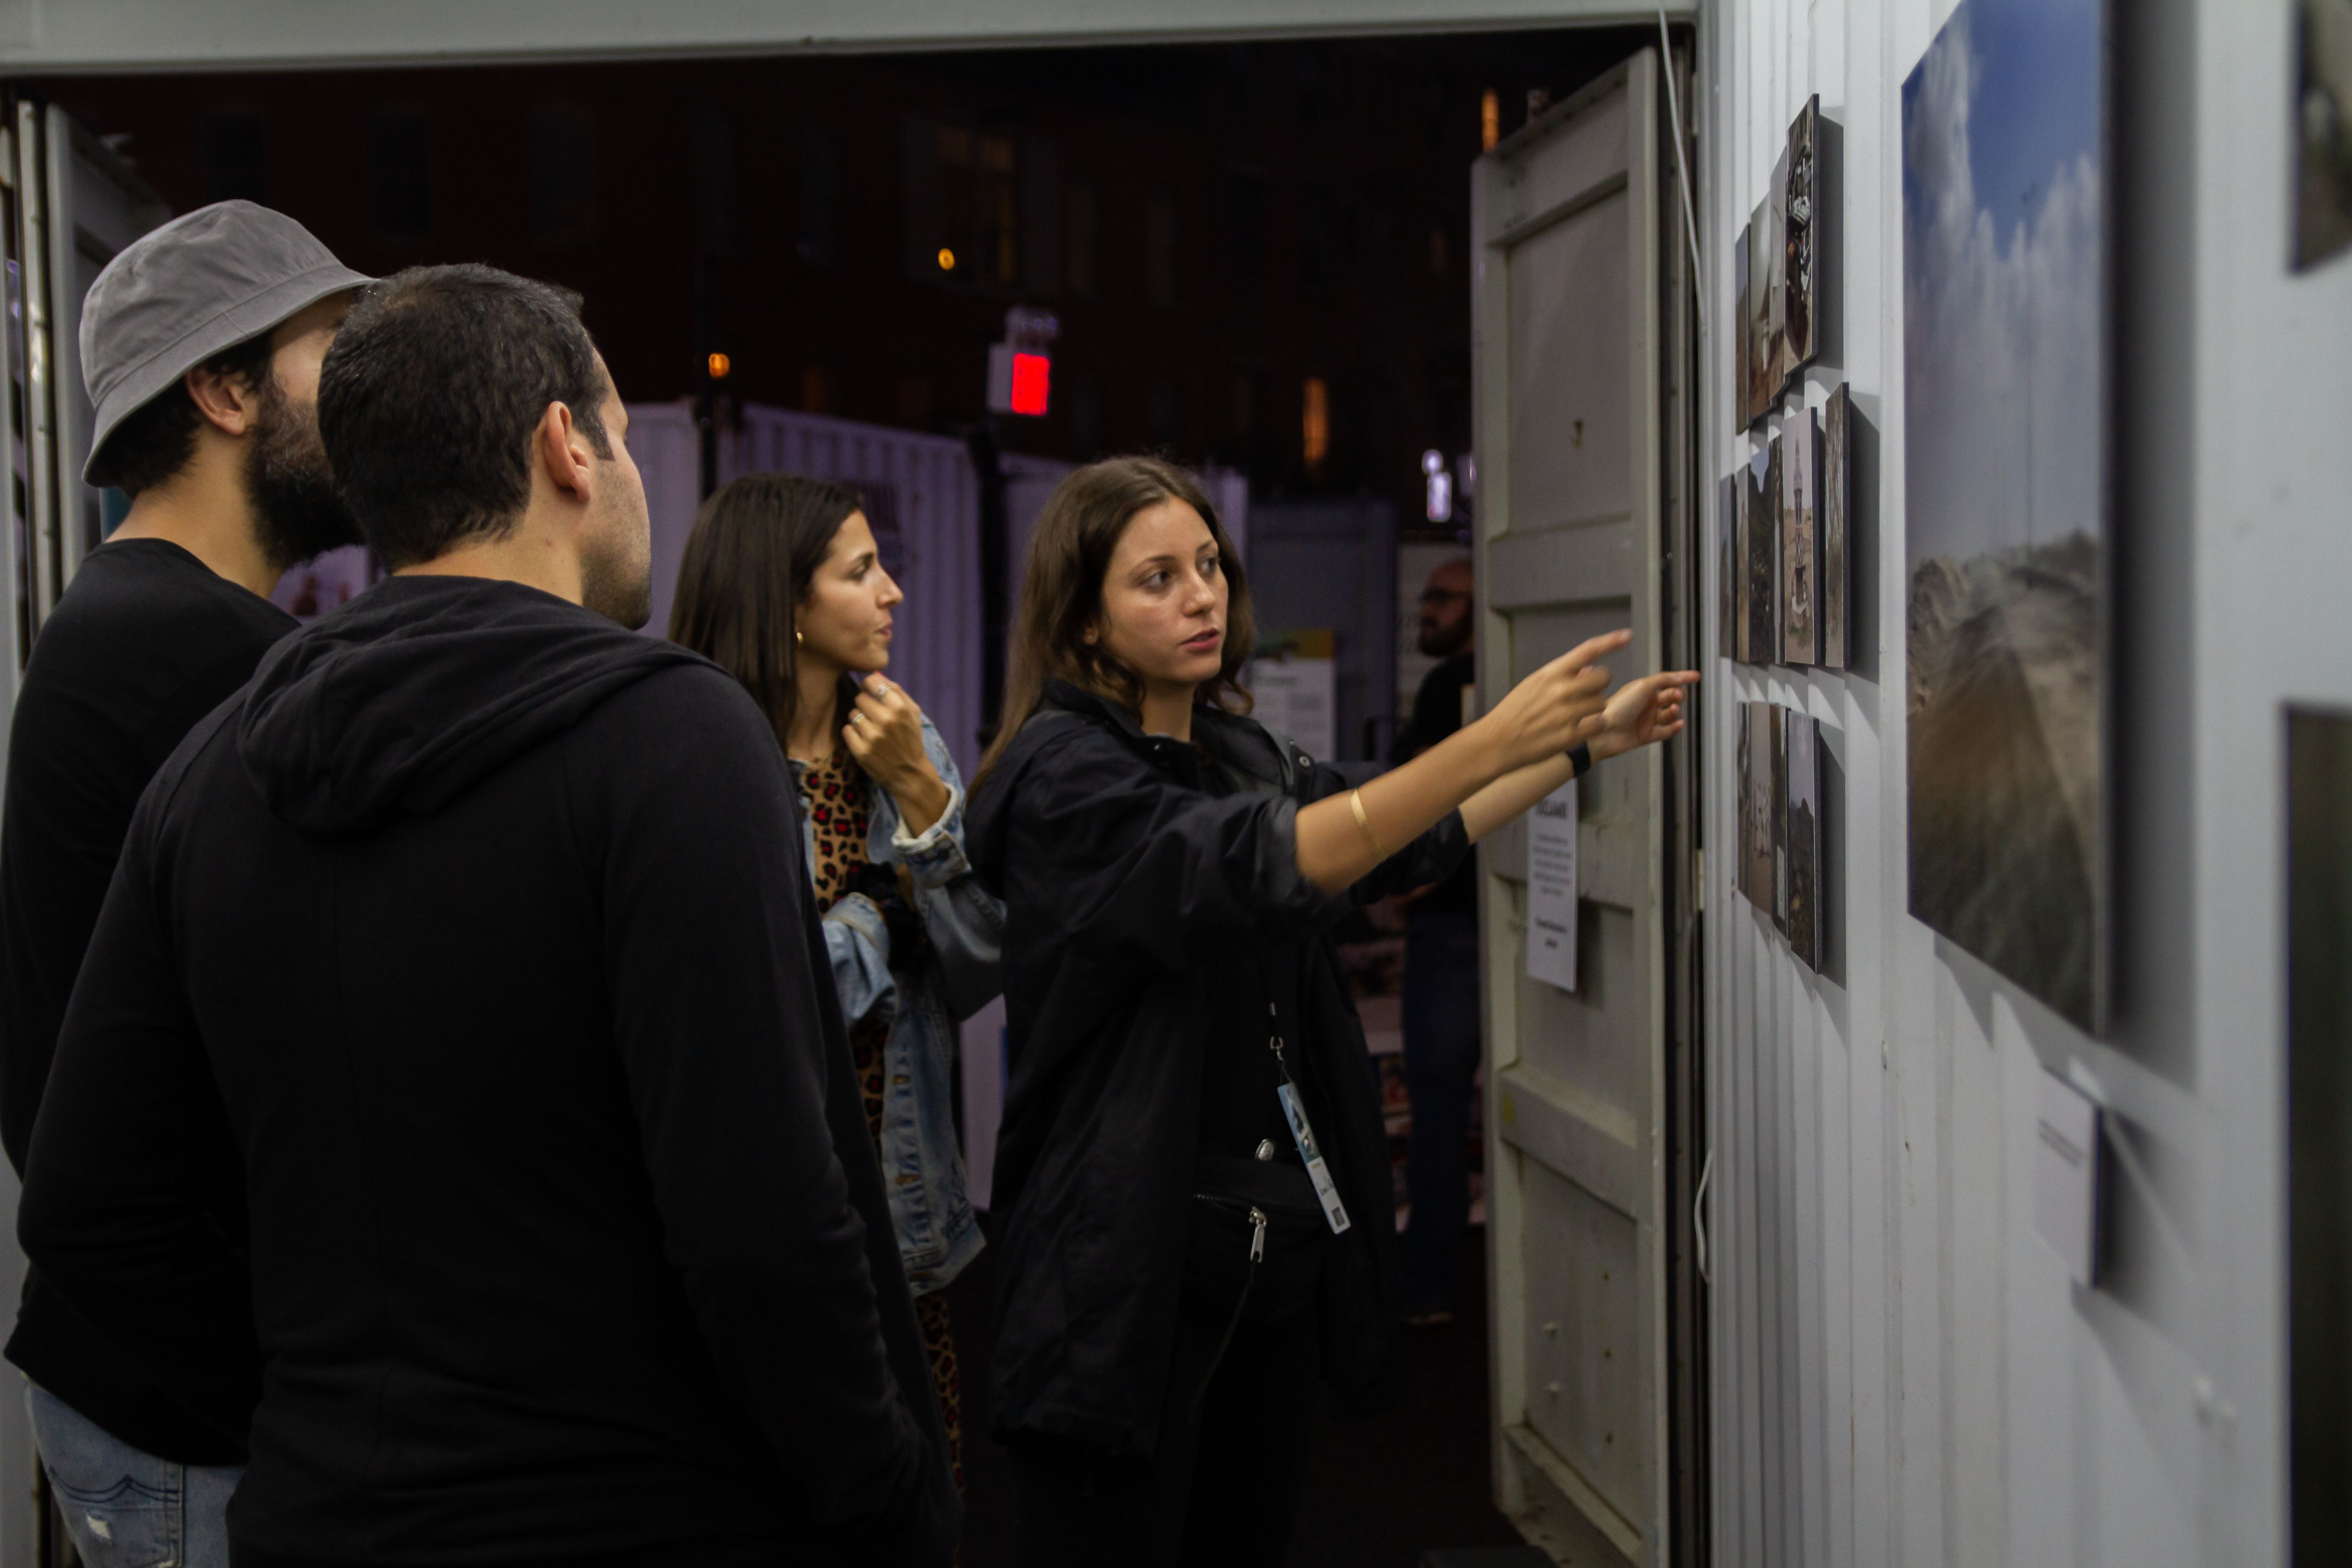 Nariman el-Mofty at the exhibit of her award-winning photographs from Yemen at Photoville. Image by Claire Seaton. United States, 2019.